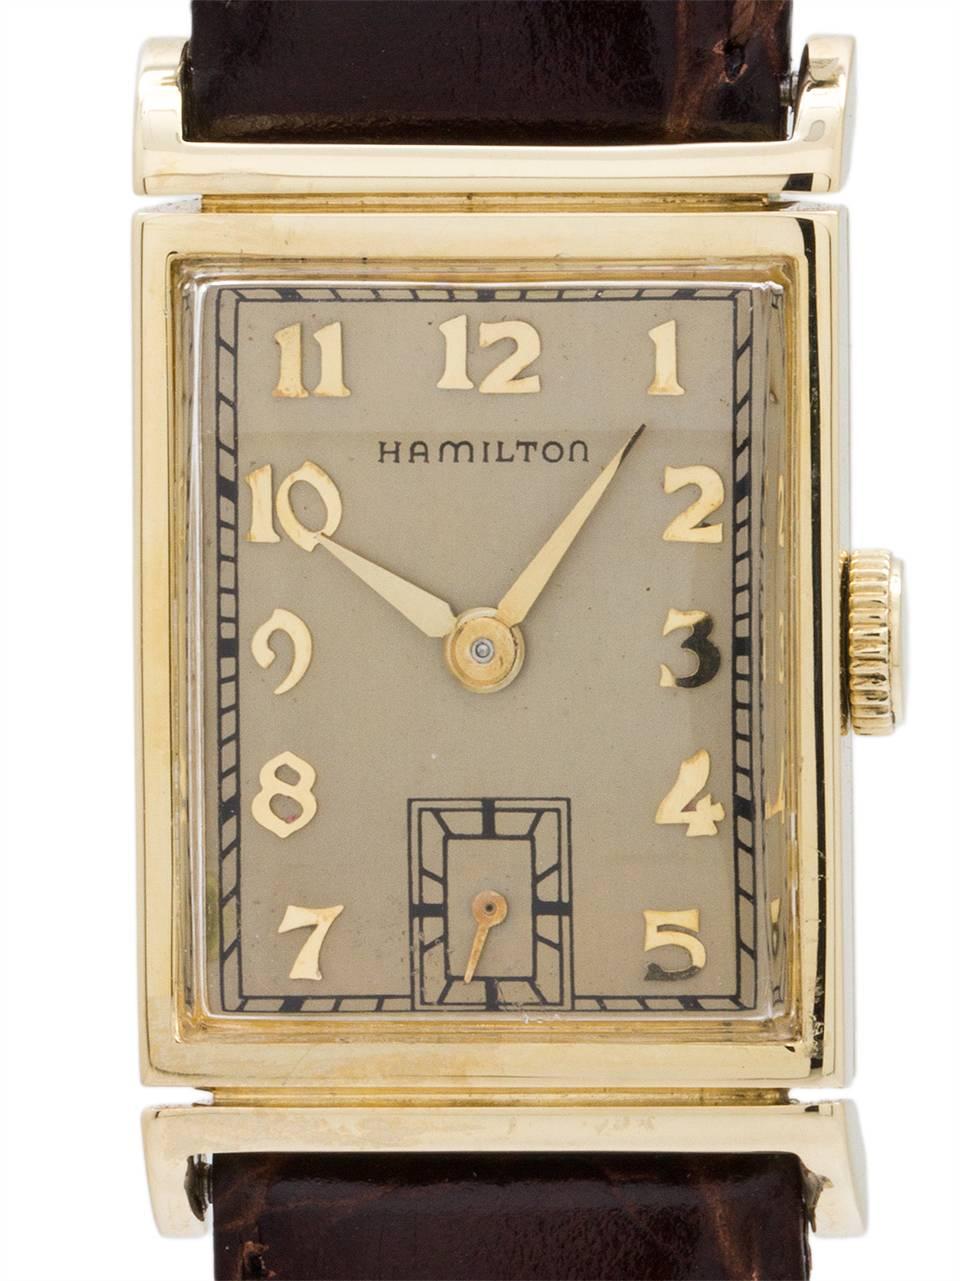 Vintage man’s Hamilton 14K YG “Gilbert” model with personalized case back engraving dating this example to 1948.  Featuring an original “Butler” silvered dial with applied 18K YG Breguet style indexes and tapered gilt hands. Powered by 17 jewel